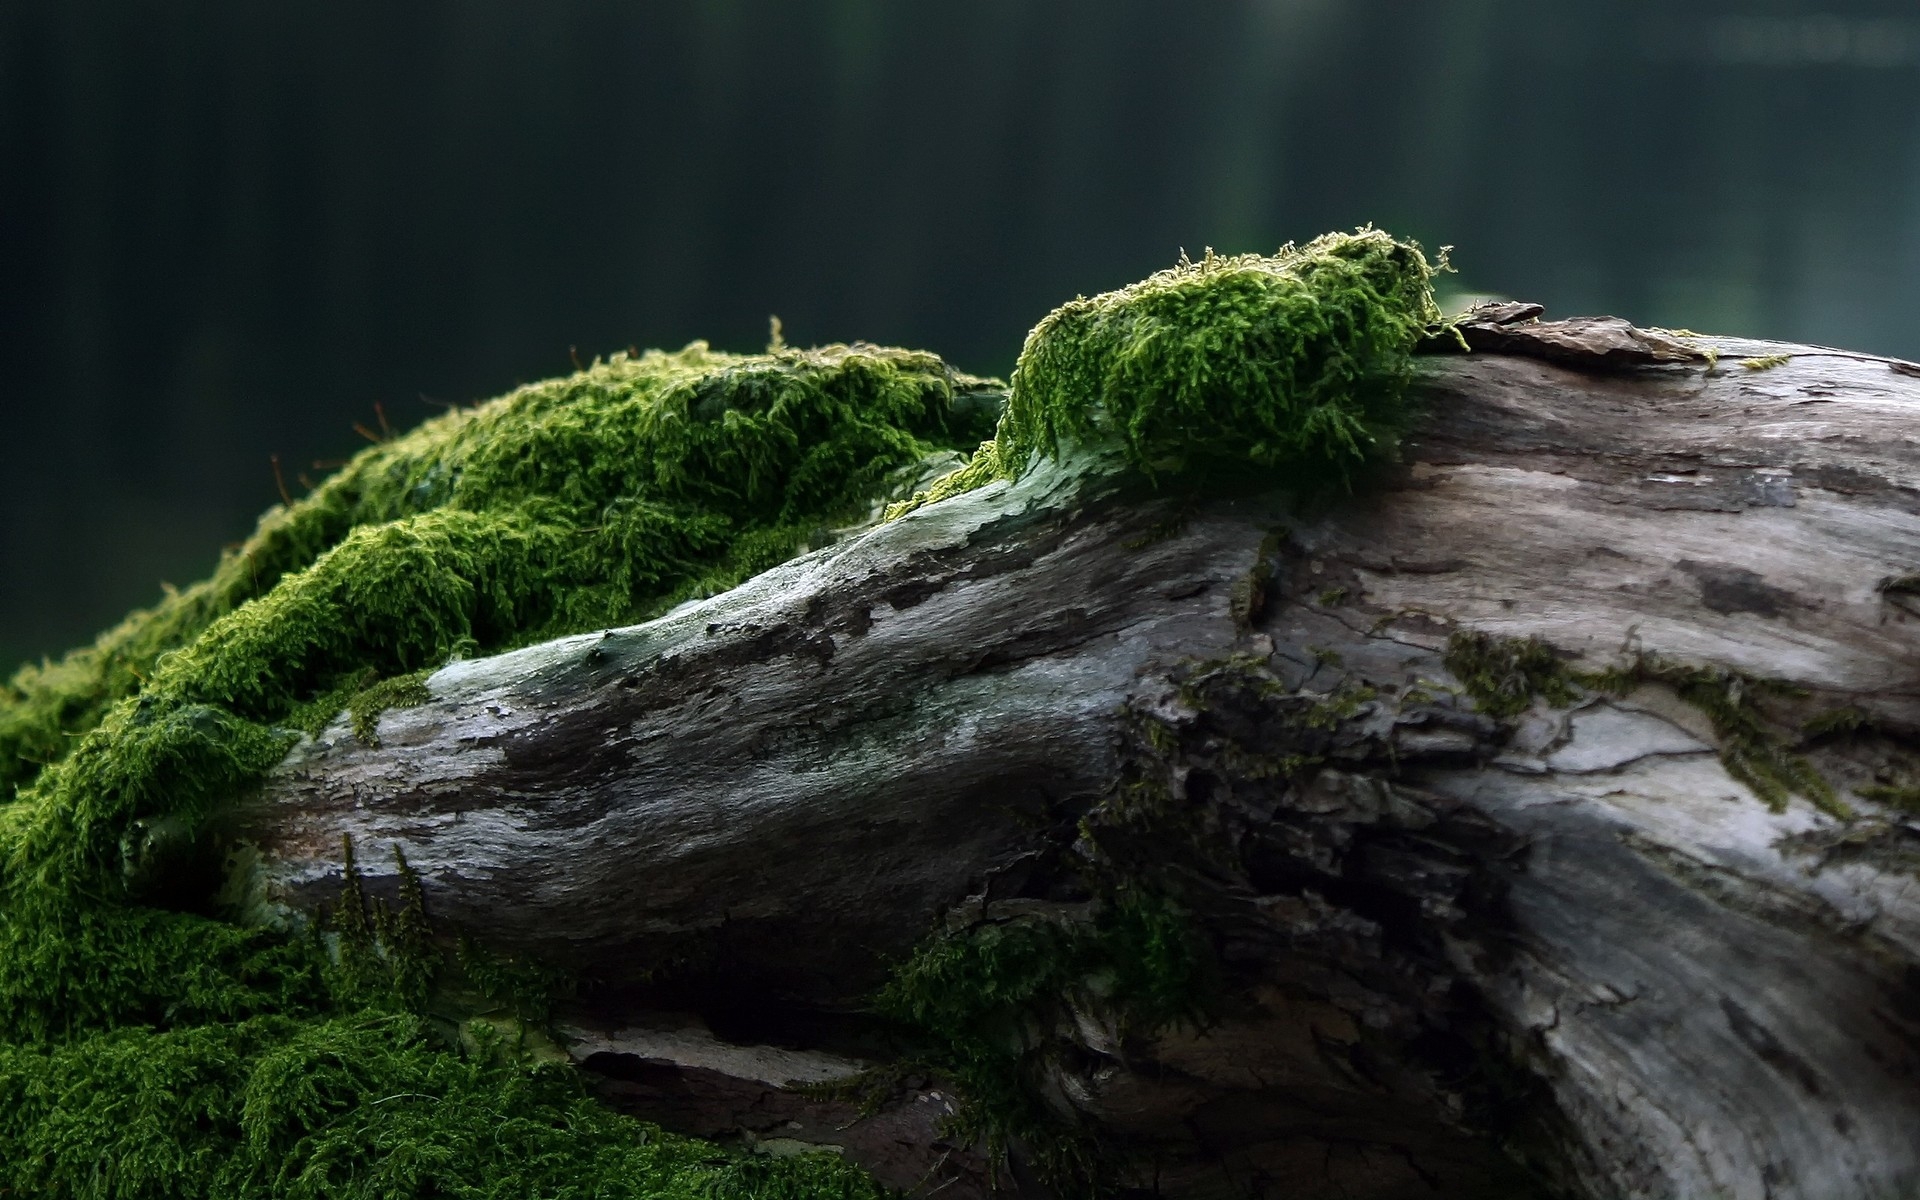 Green moss on an old snag